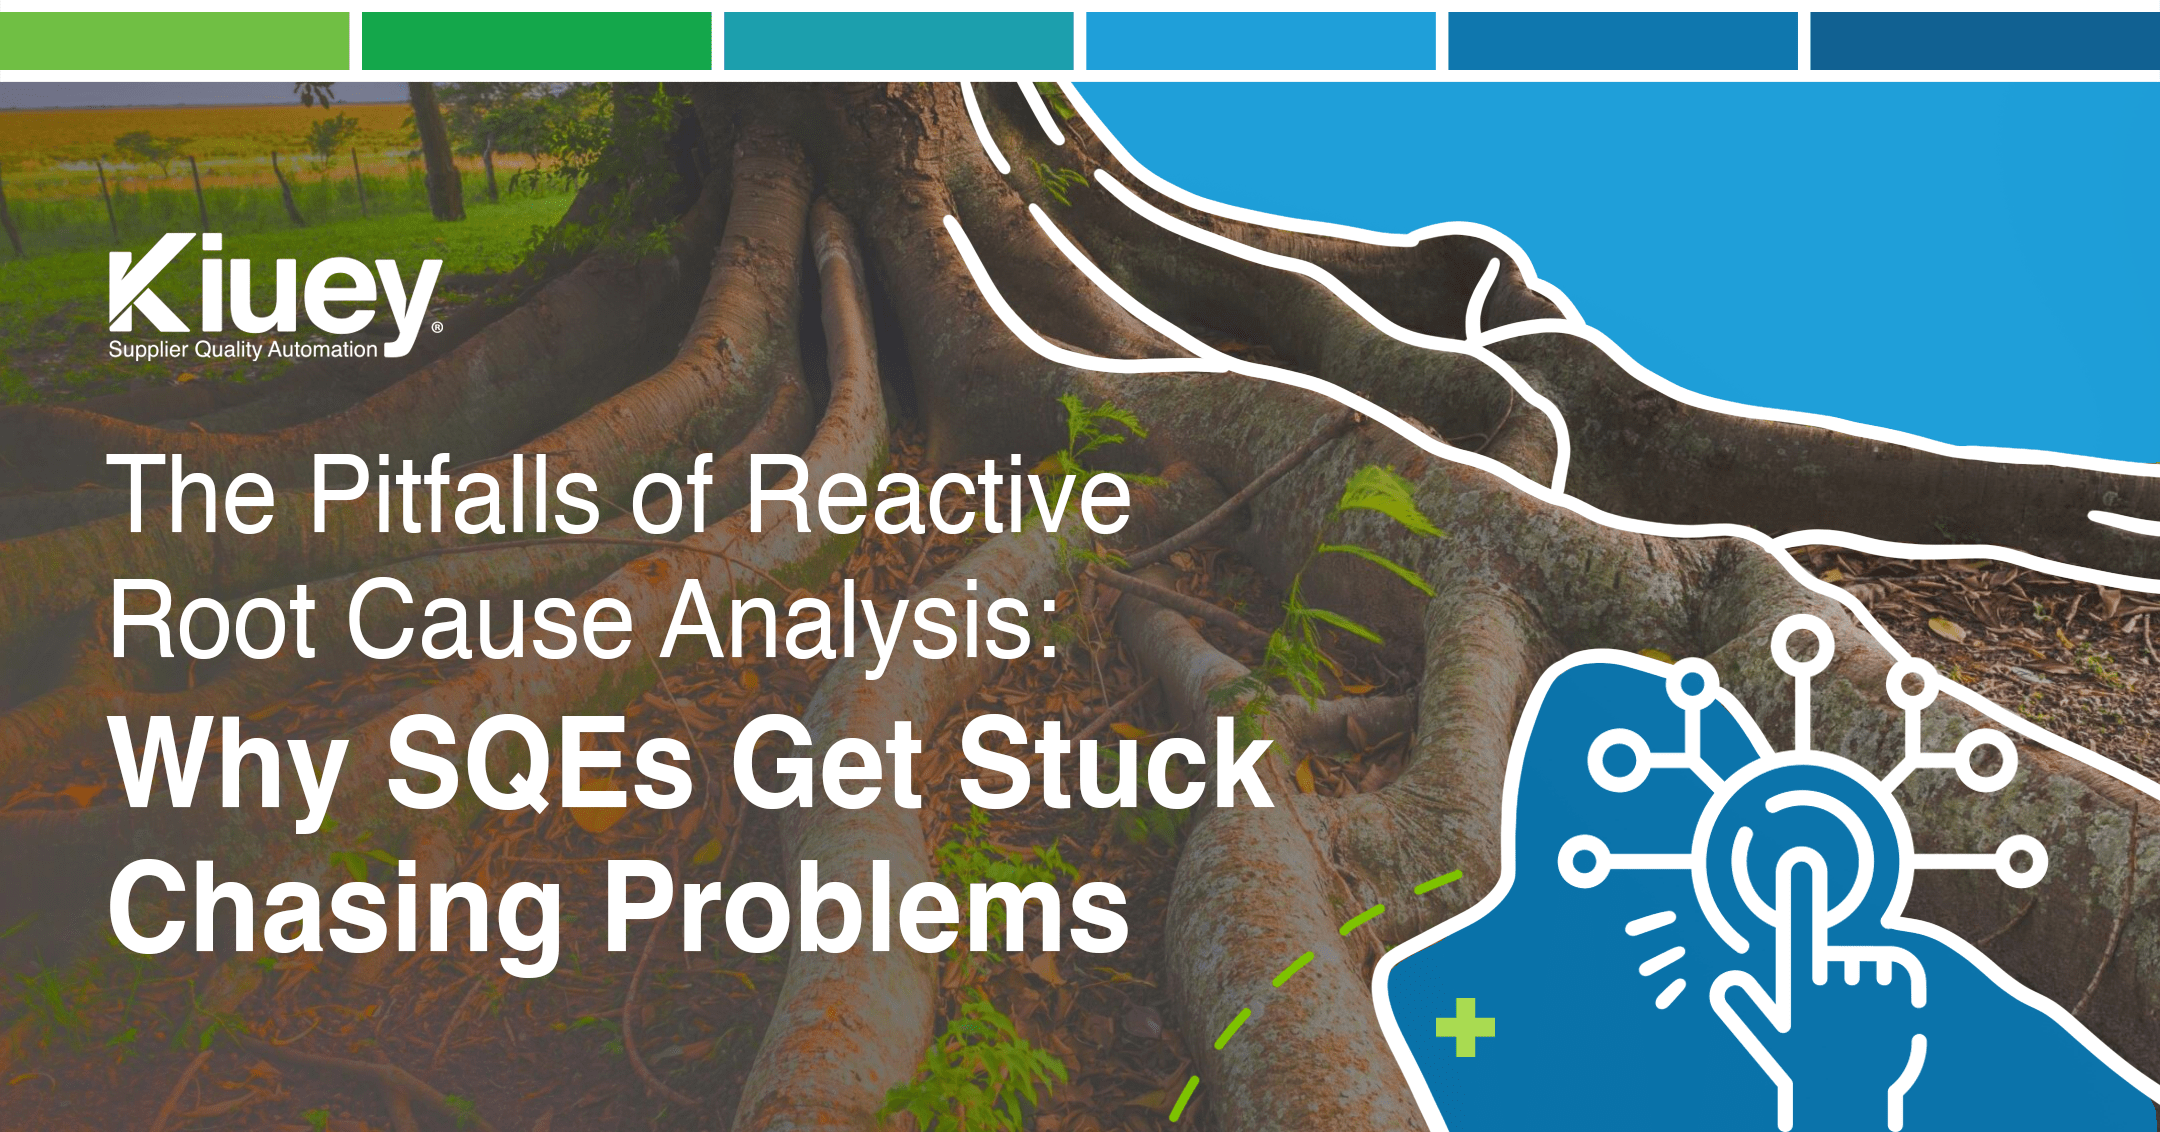 The Pitfalls of Reactive Root Cause Analysis: Why SQEs Get Stuck Chasing Problems